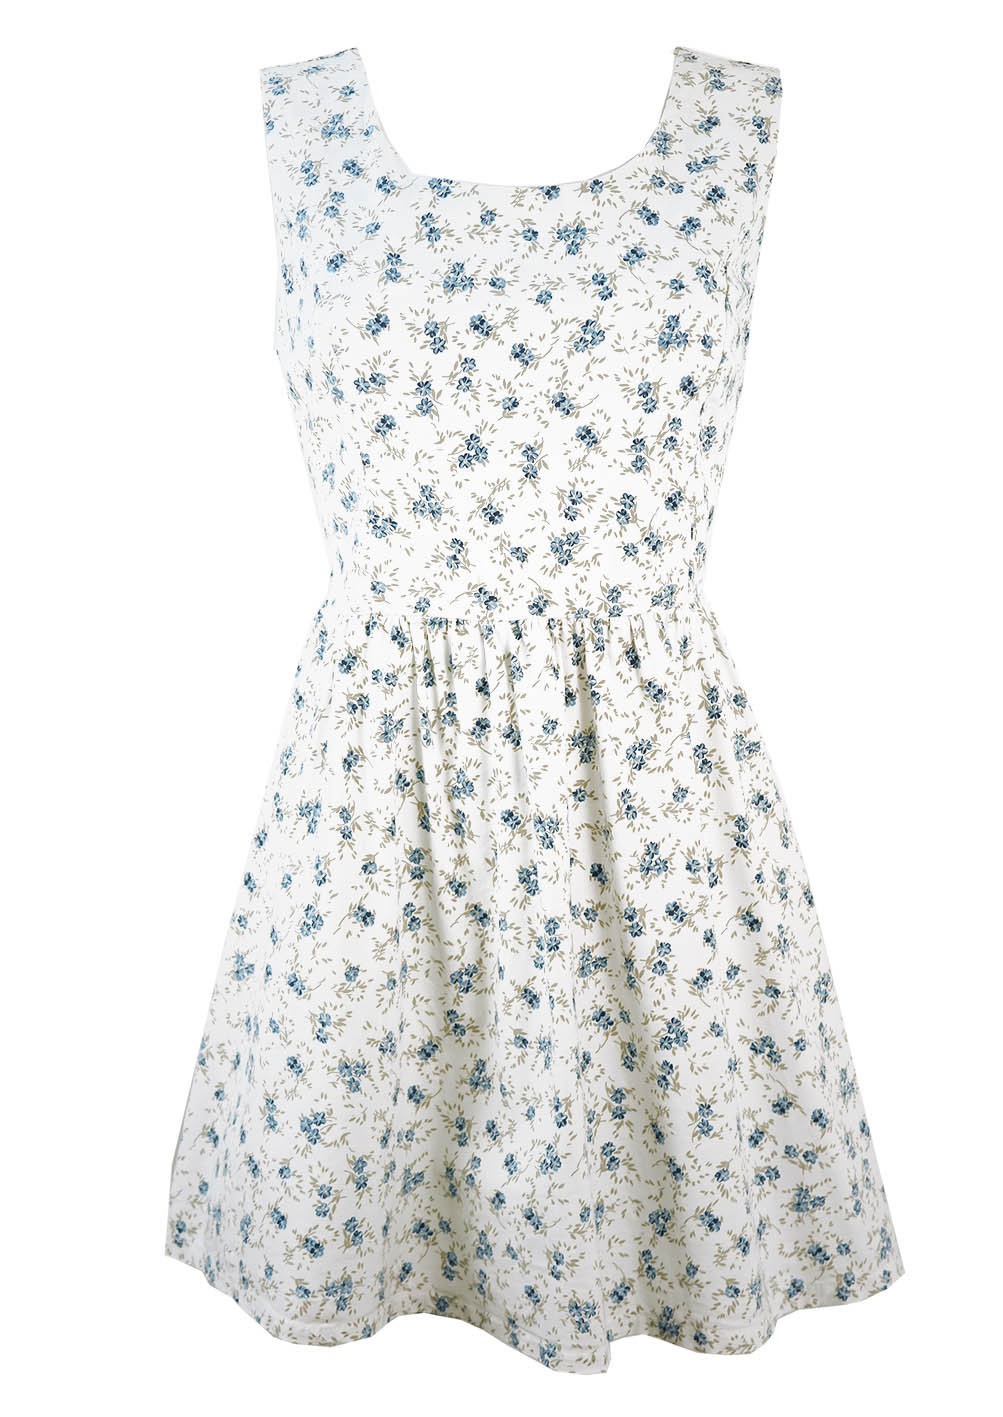 Vintage 1950's Style Mini Dress with Blue & White Ditsy Floral Print ...